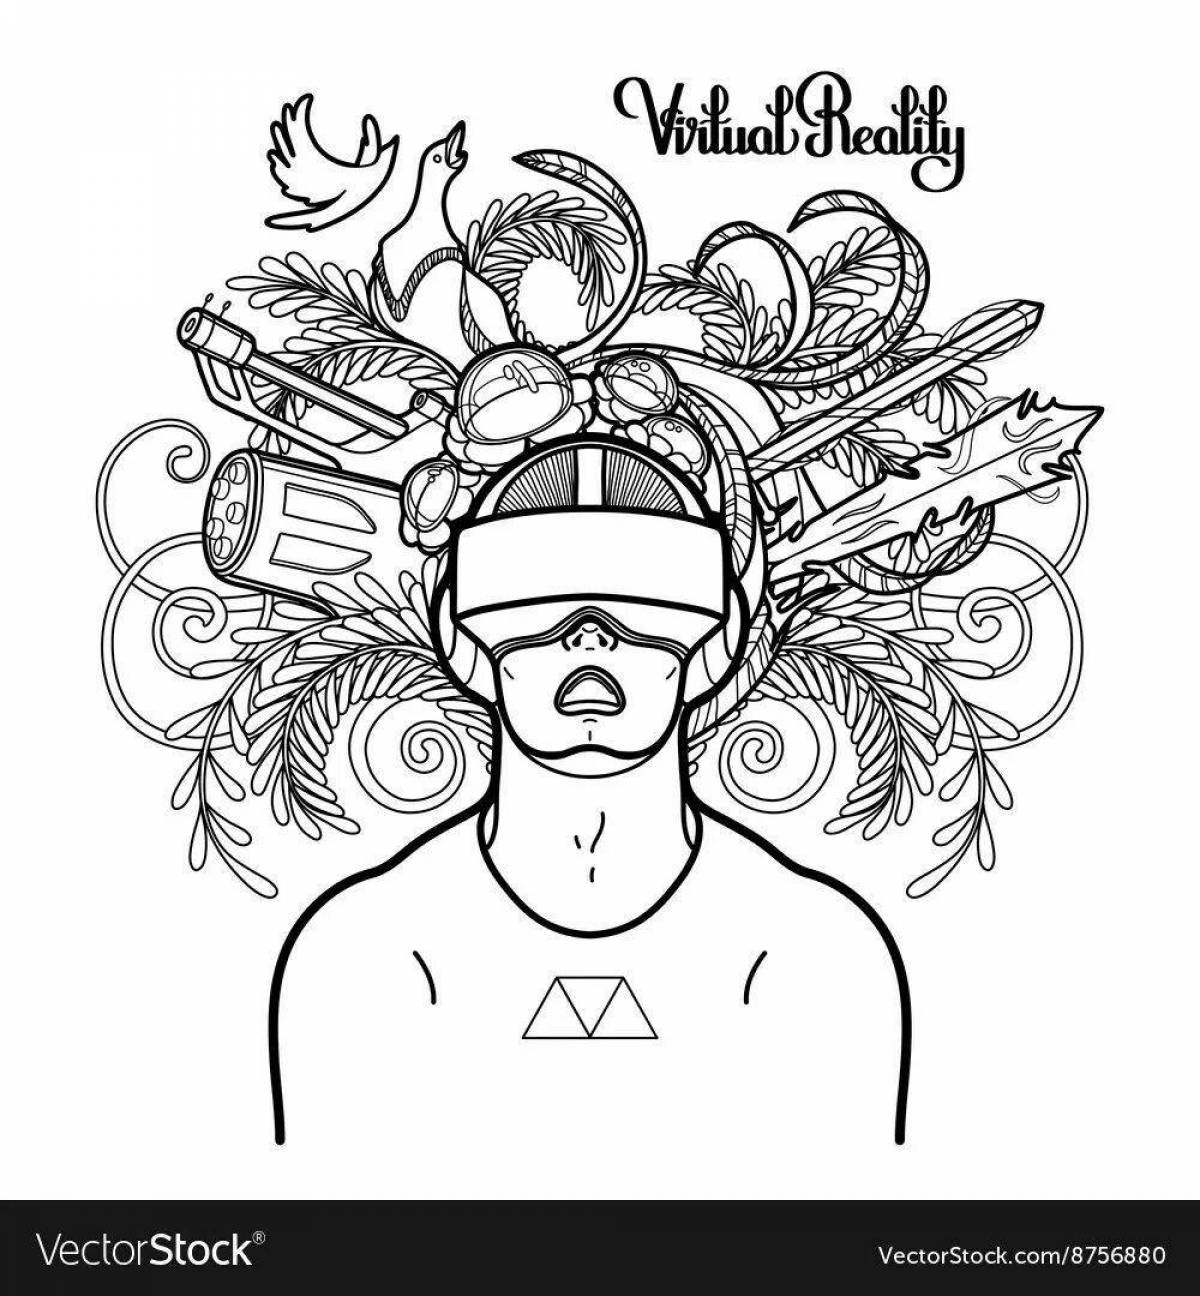 Colorful virtual reality coloring page